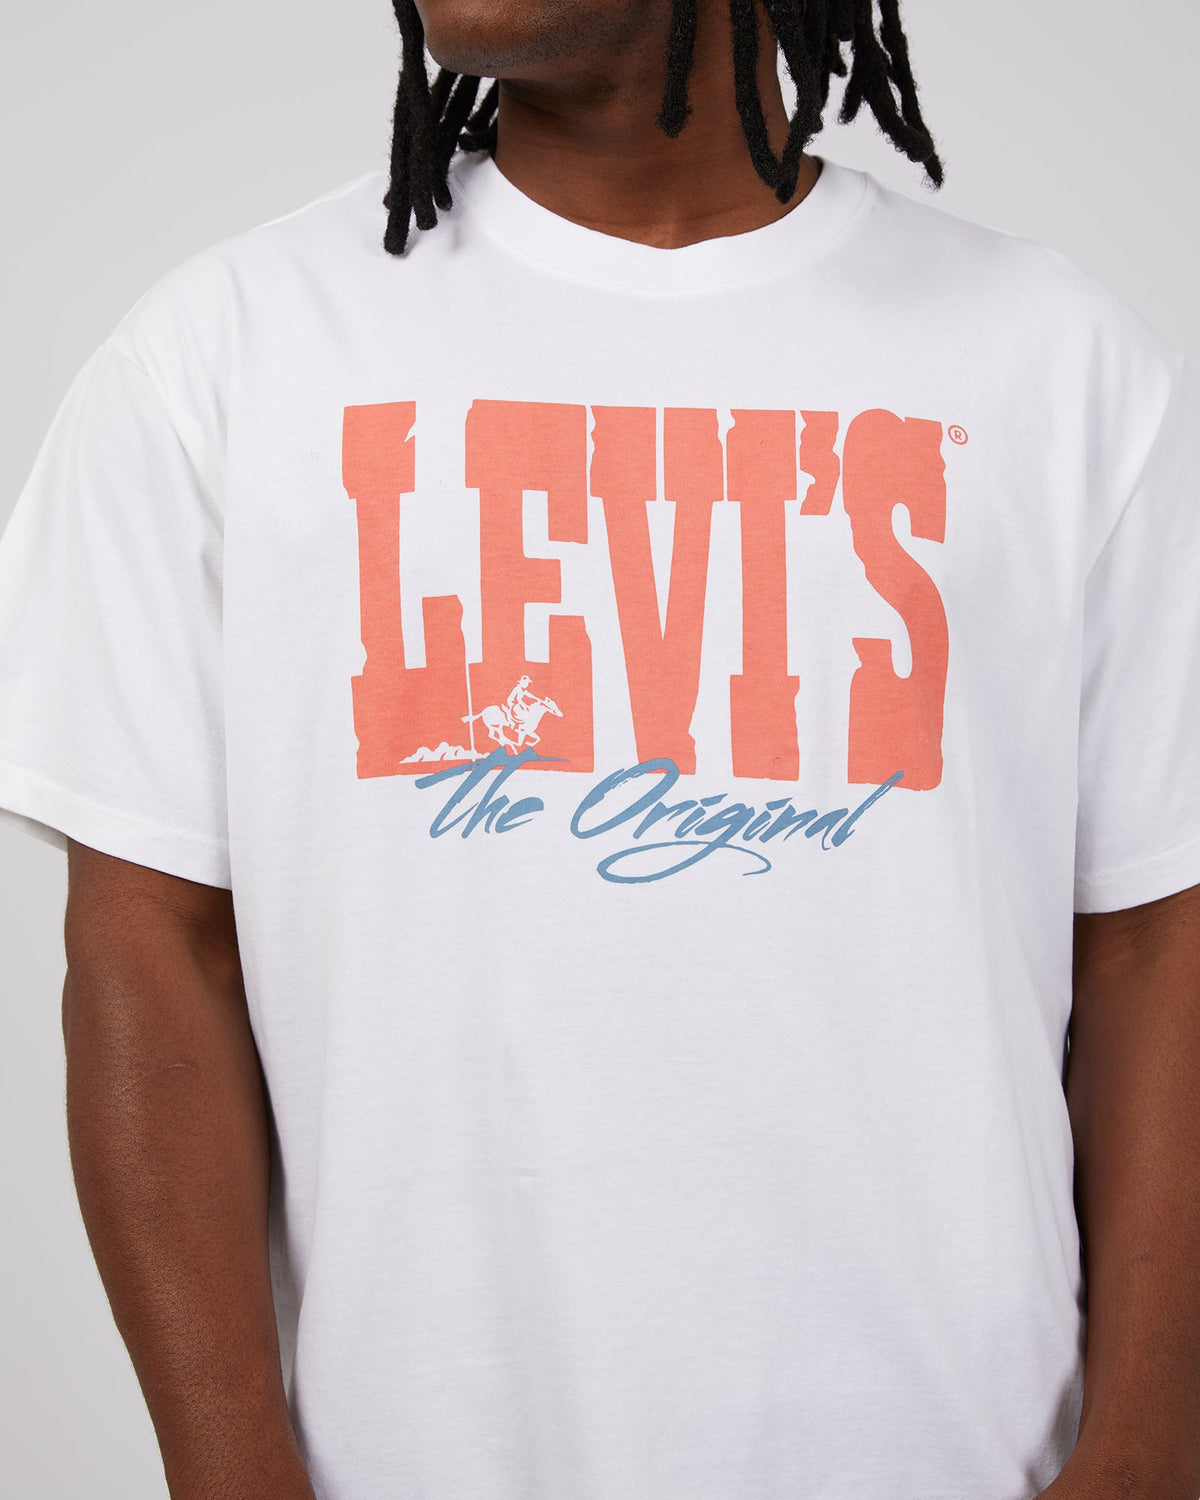 Levis-Vintage Fit Graphic Tee White-Edge Clothing